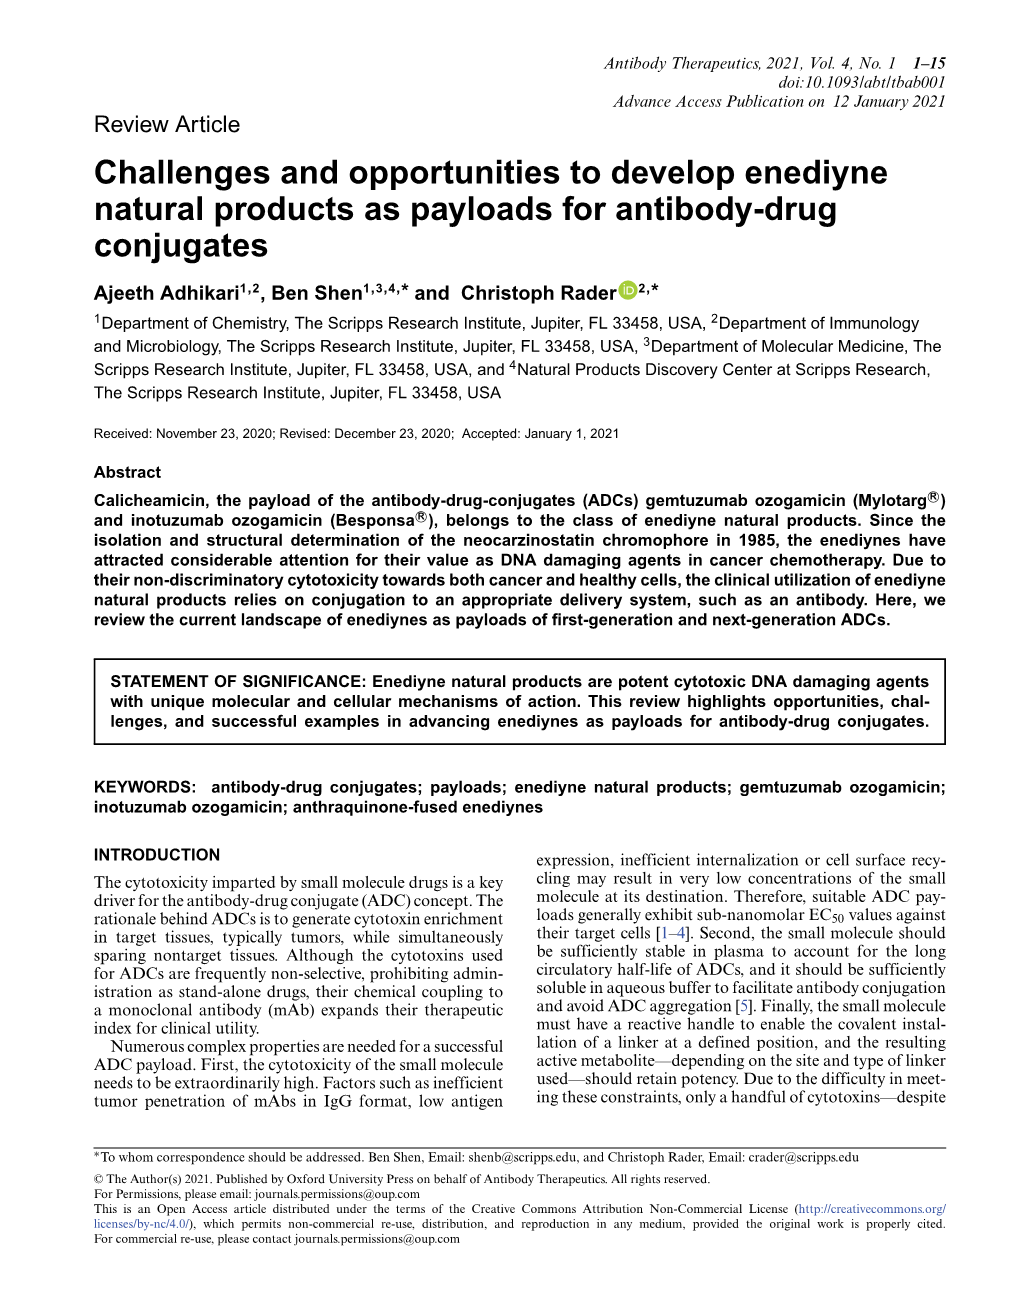 Challenges and Opportunities to Develop Enediyne Natural Products As Payloads for Antibody-Drug Conjugates